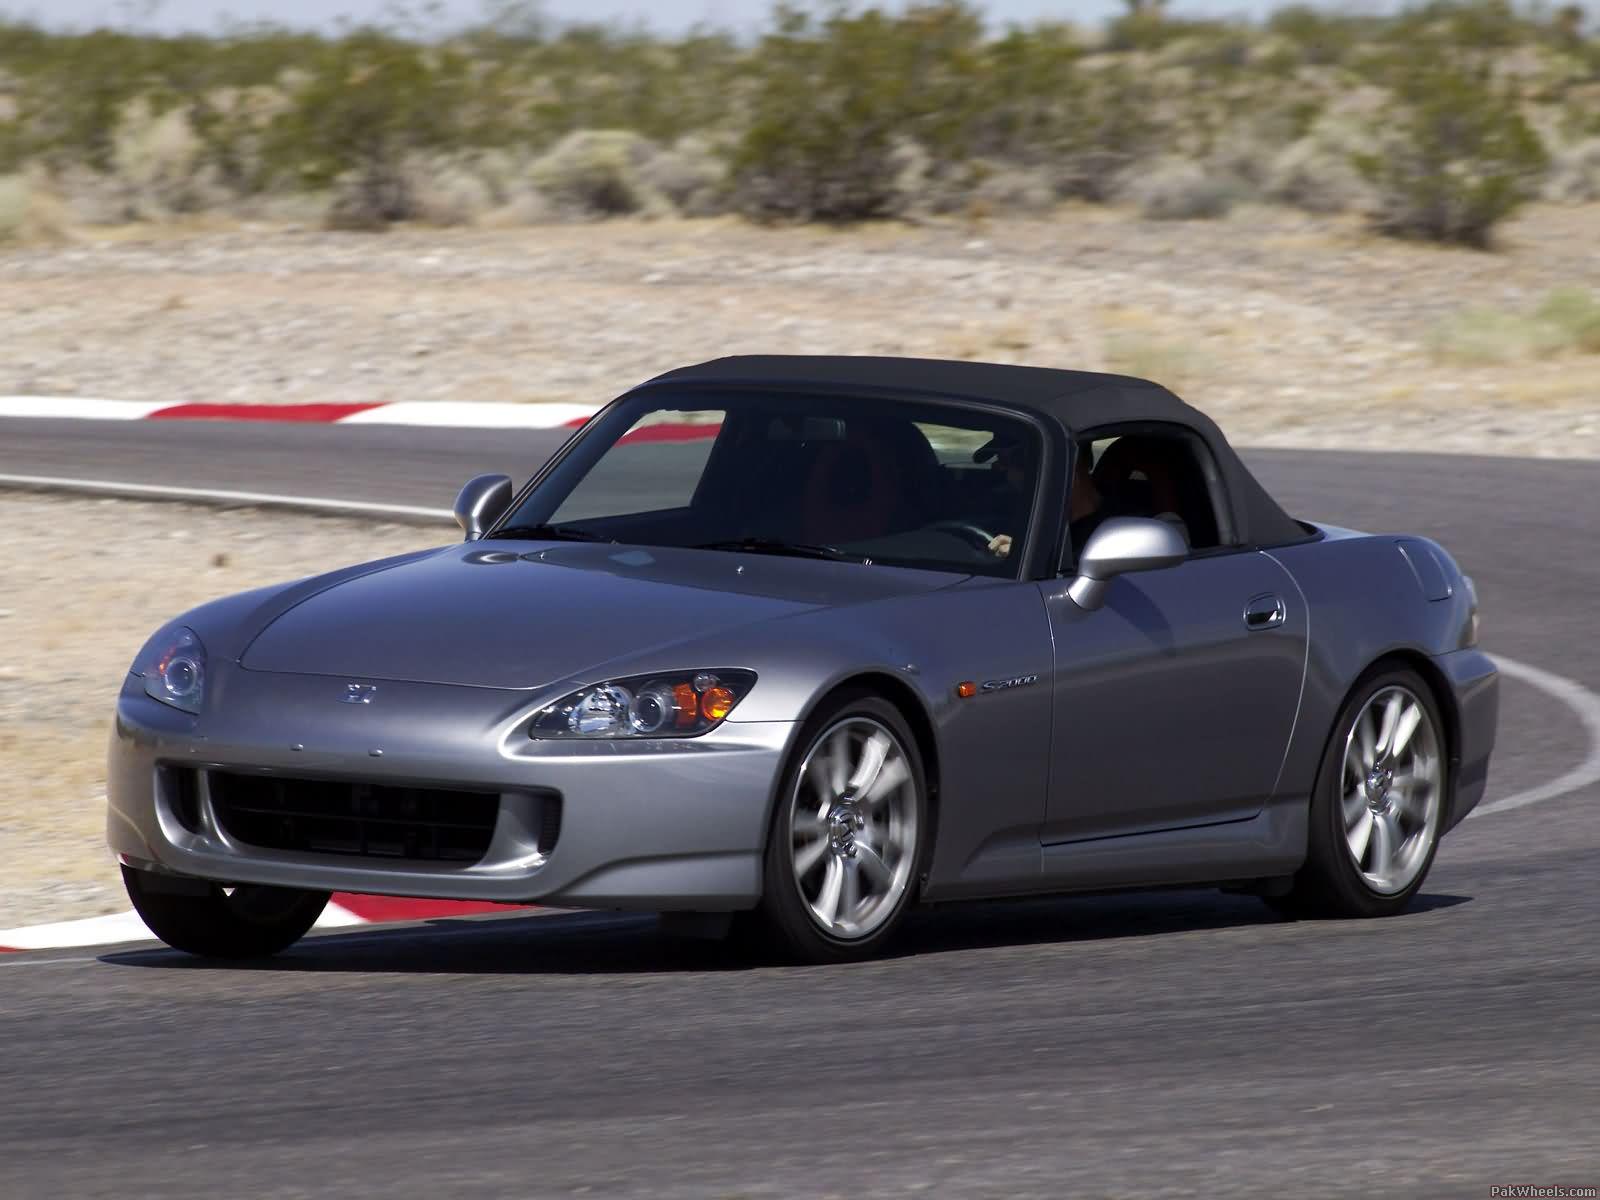 Wallpaper For Honda S2000 Best Wall Papers With Collection